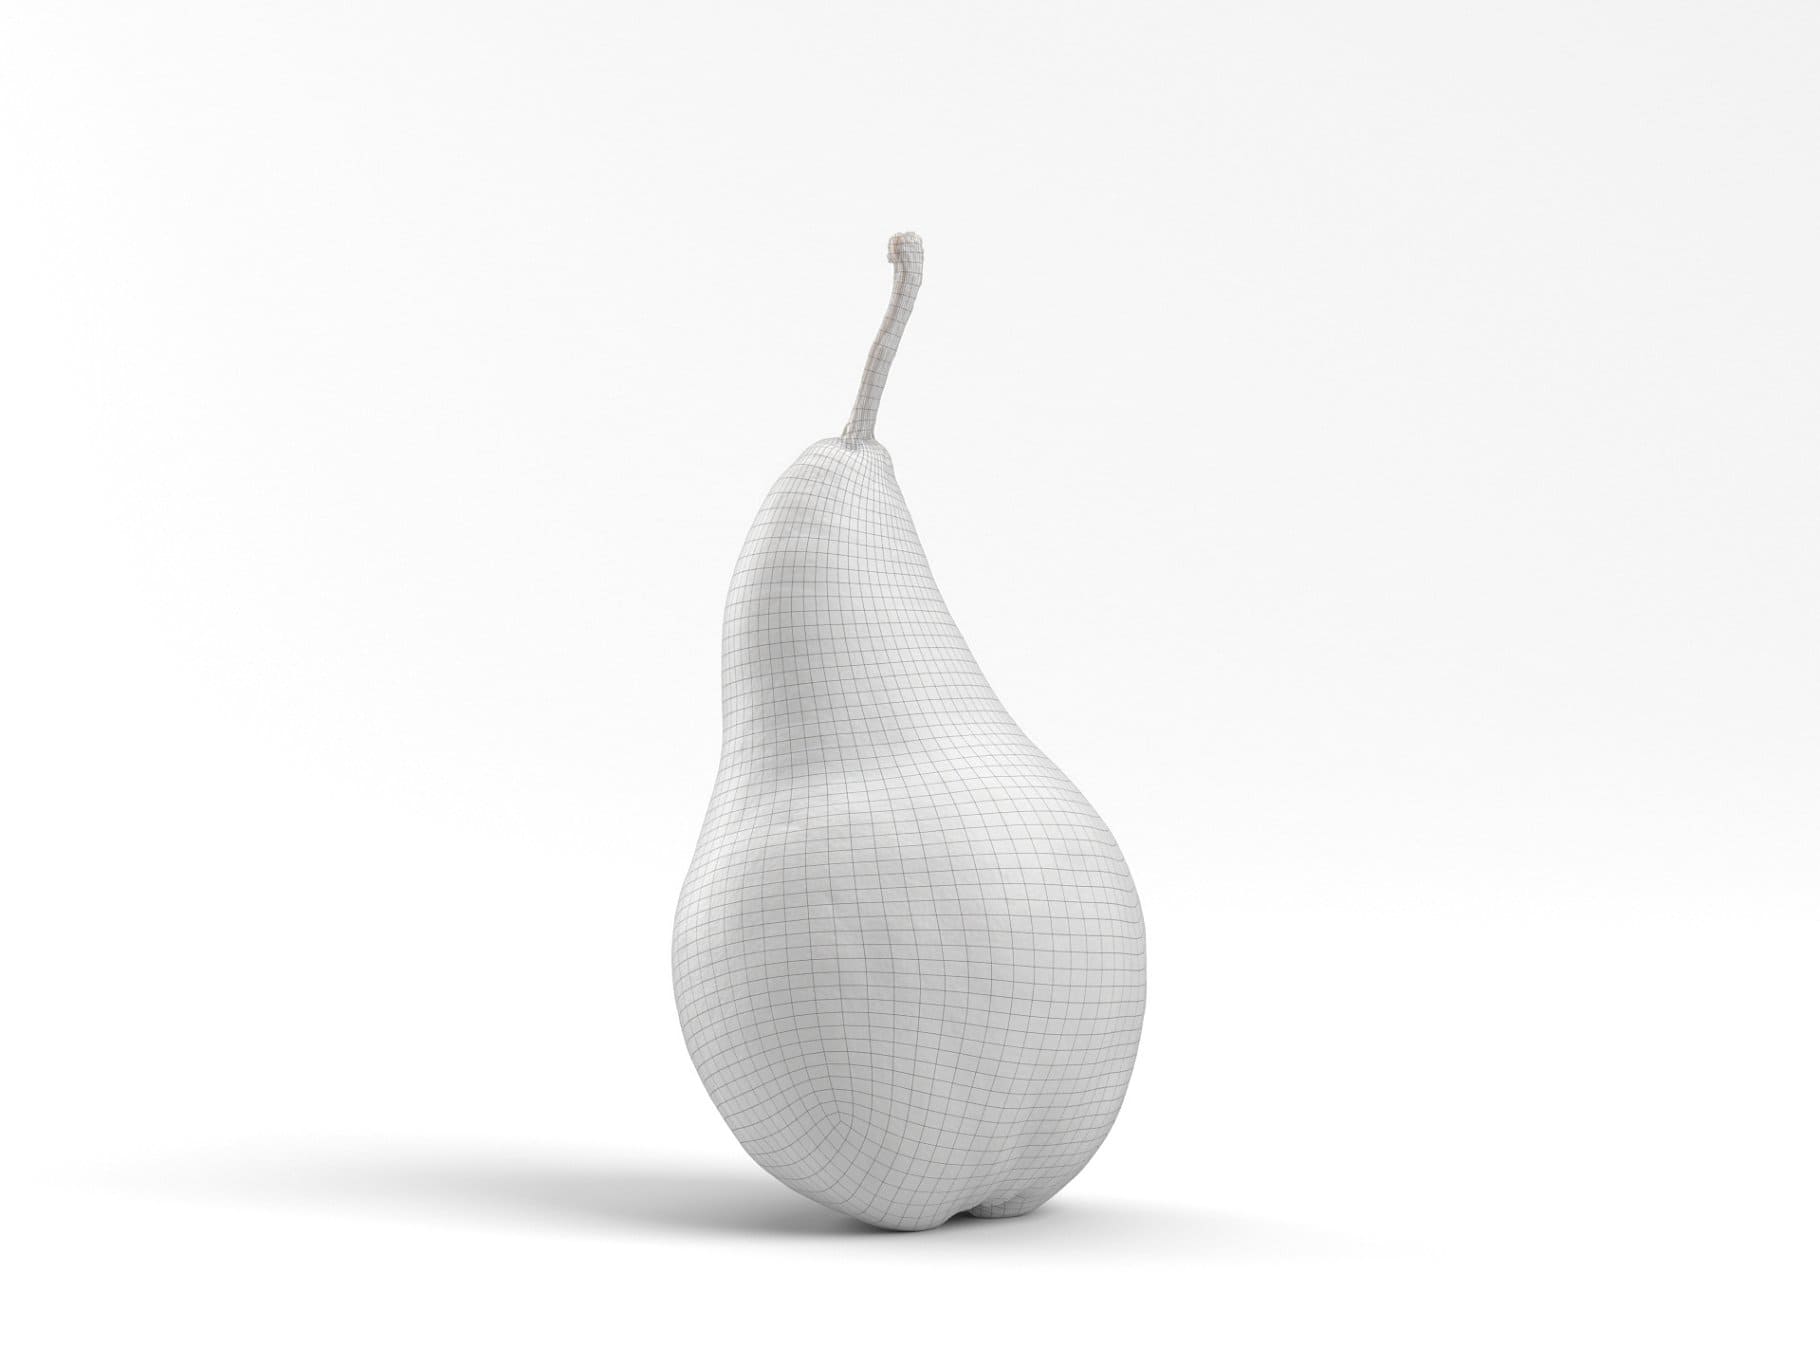 3D model of a white pear with a gray tail on a white background.